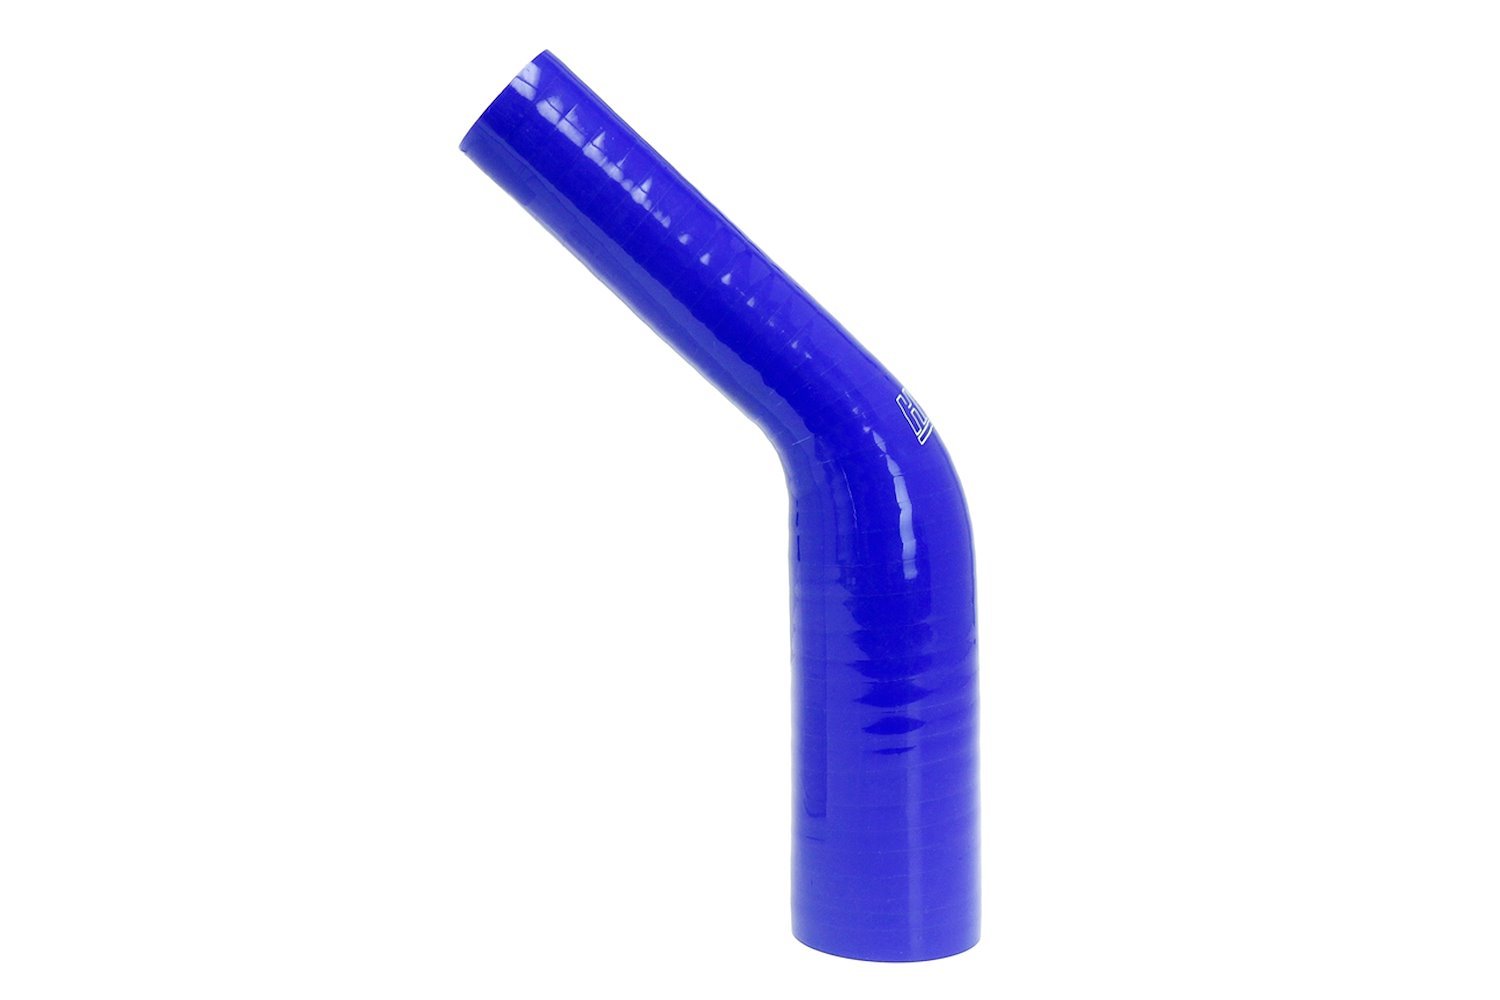 HTSER45-175-225-BLUE Silicone 45-Degree Elbow Hose, High-Temp 4-Ply Reinforced, 1-3/4 in. - 2-1/4 in. ID, Blue